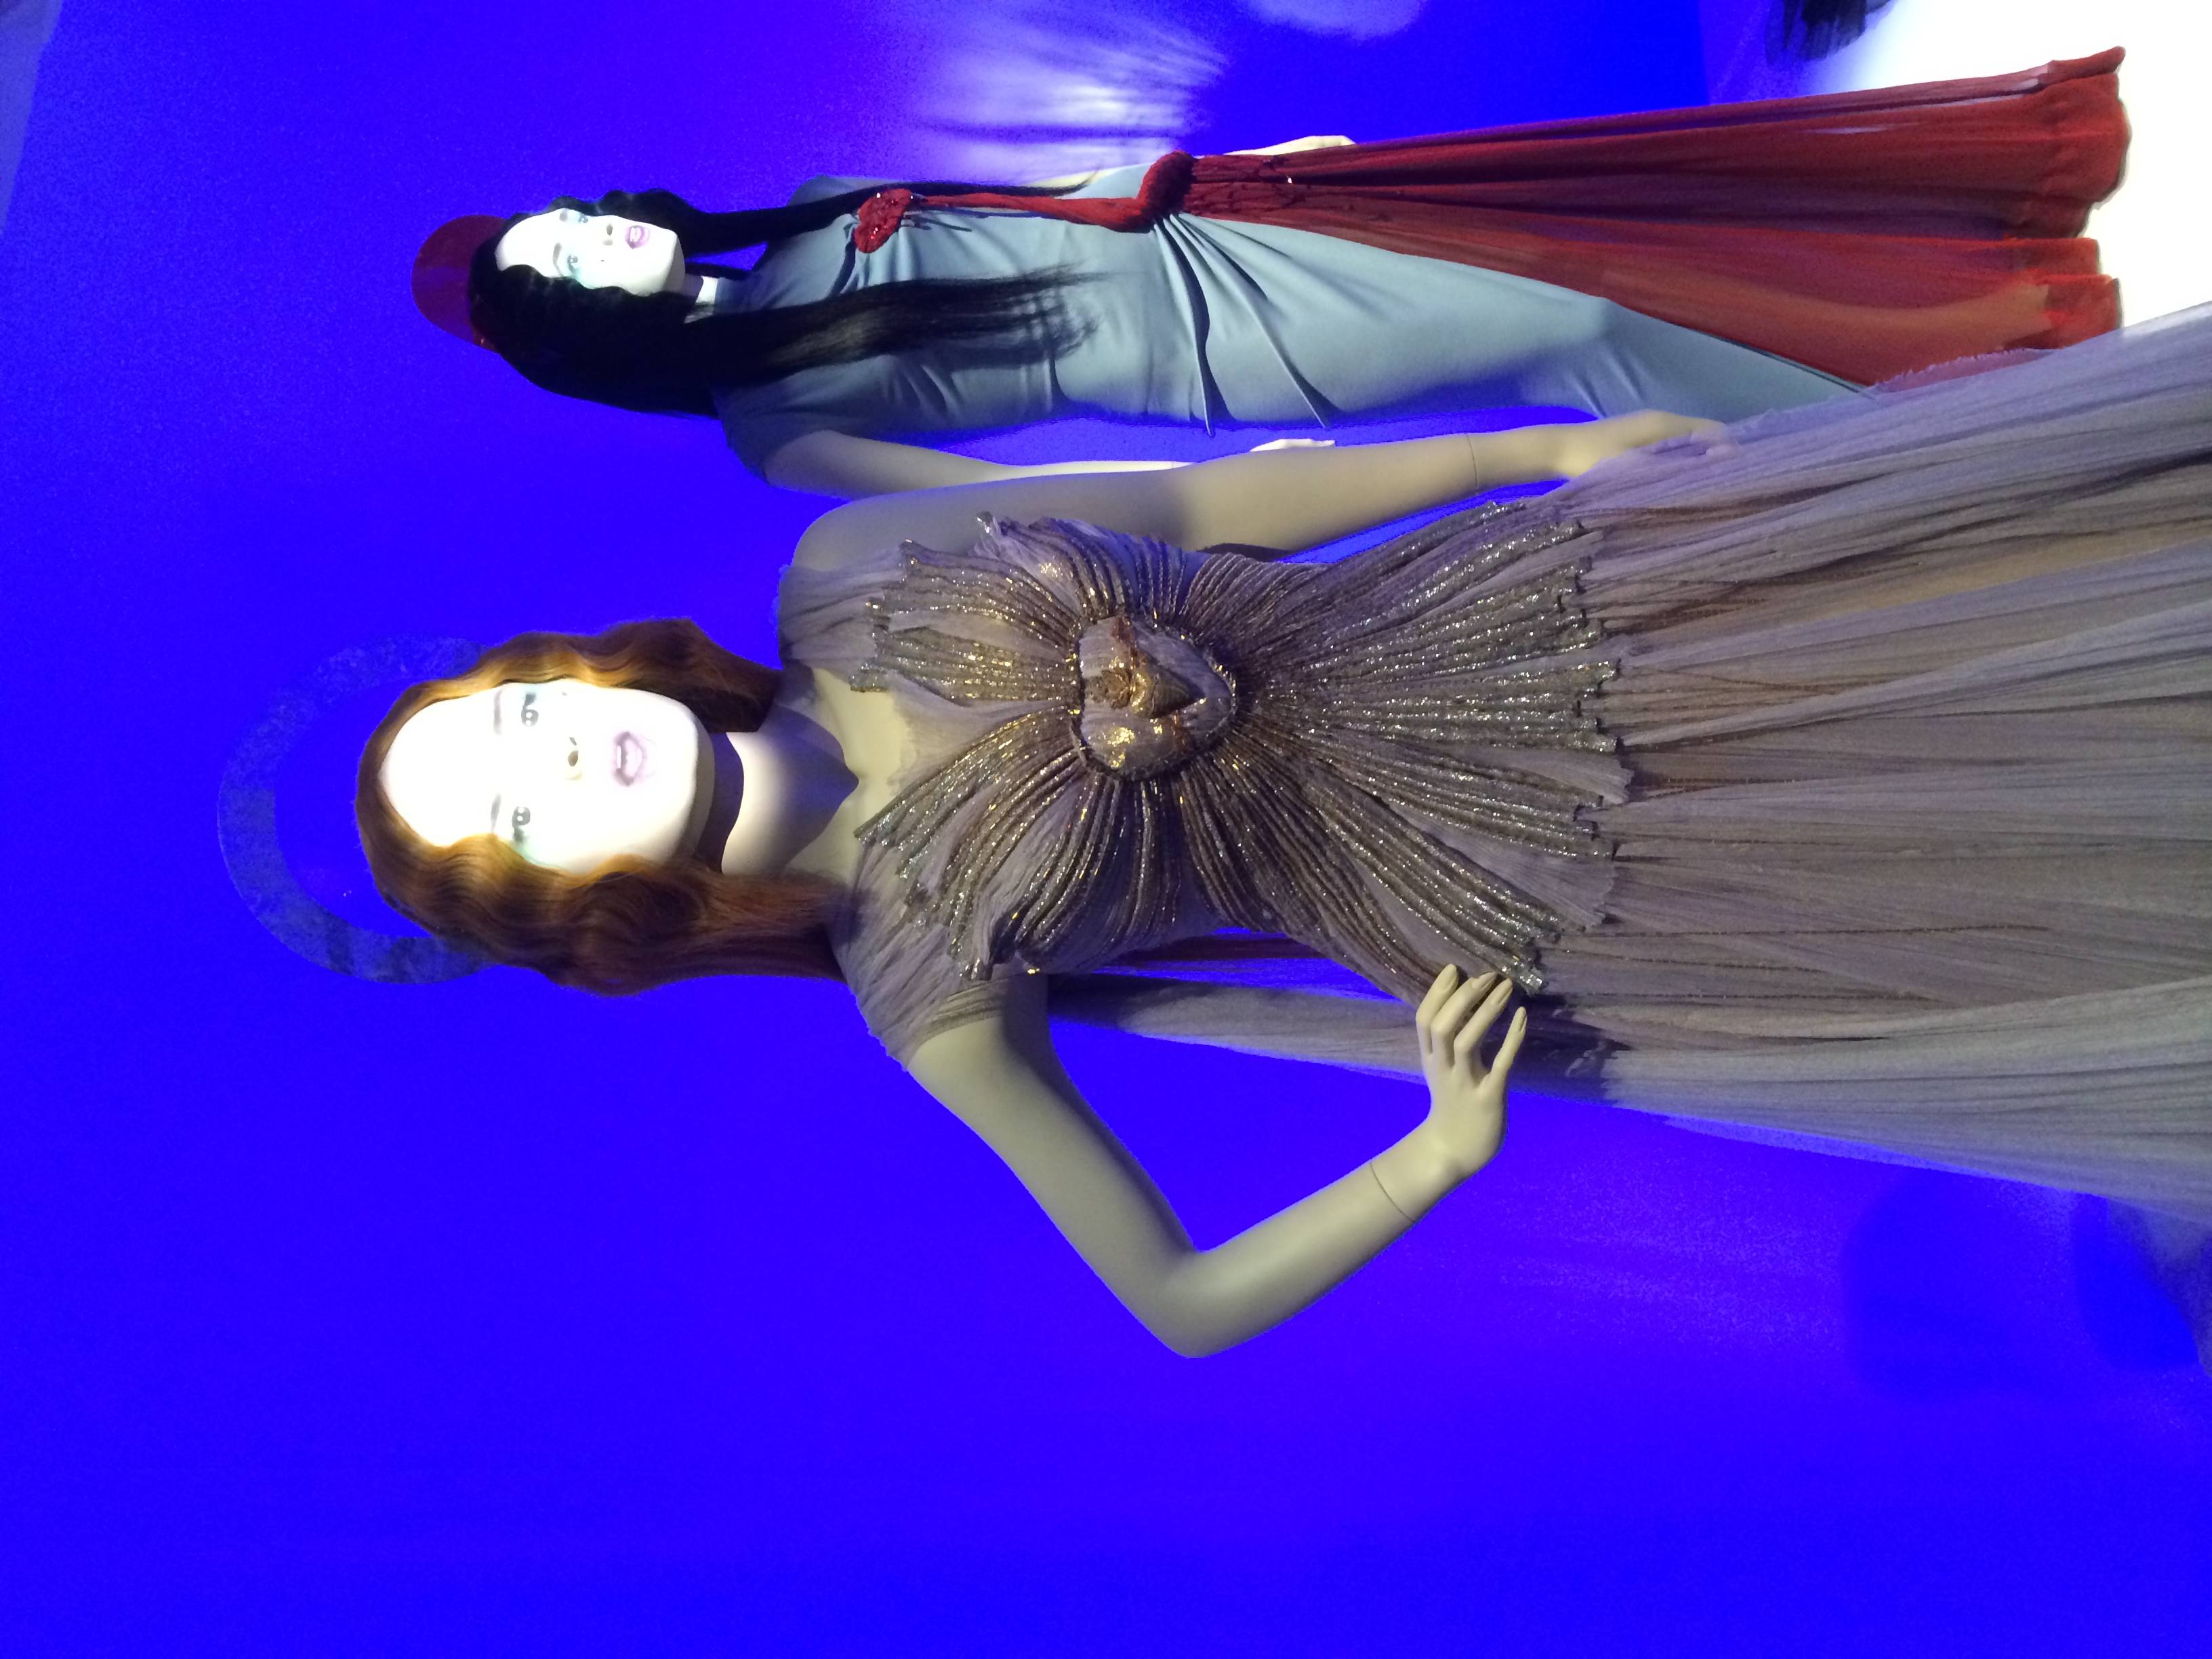 Jean Paul Gaultier's Avant-Garde Designs Come to Life at Brooklyn ...